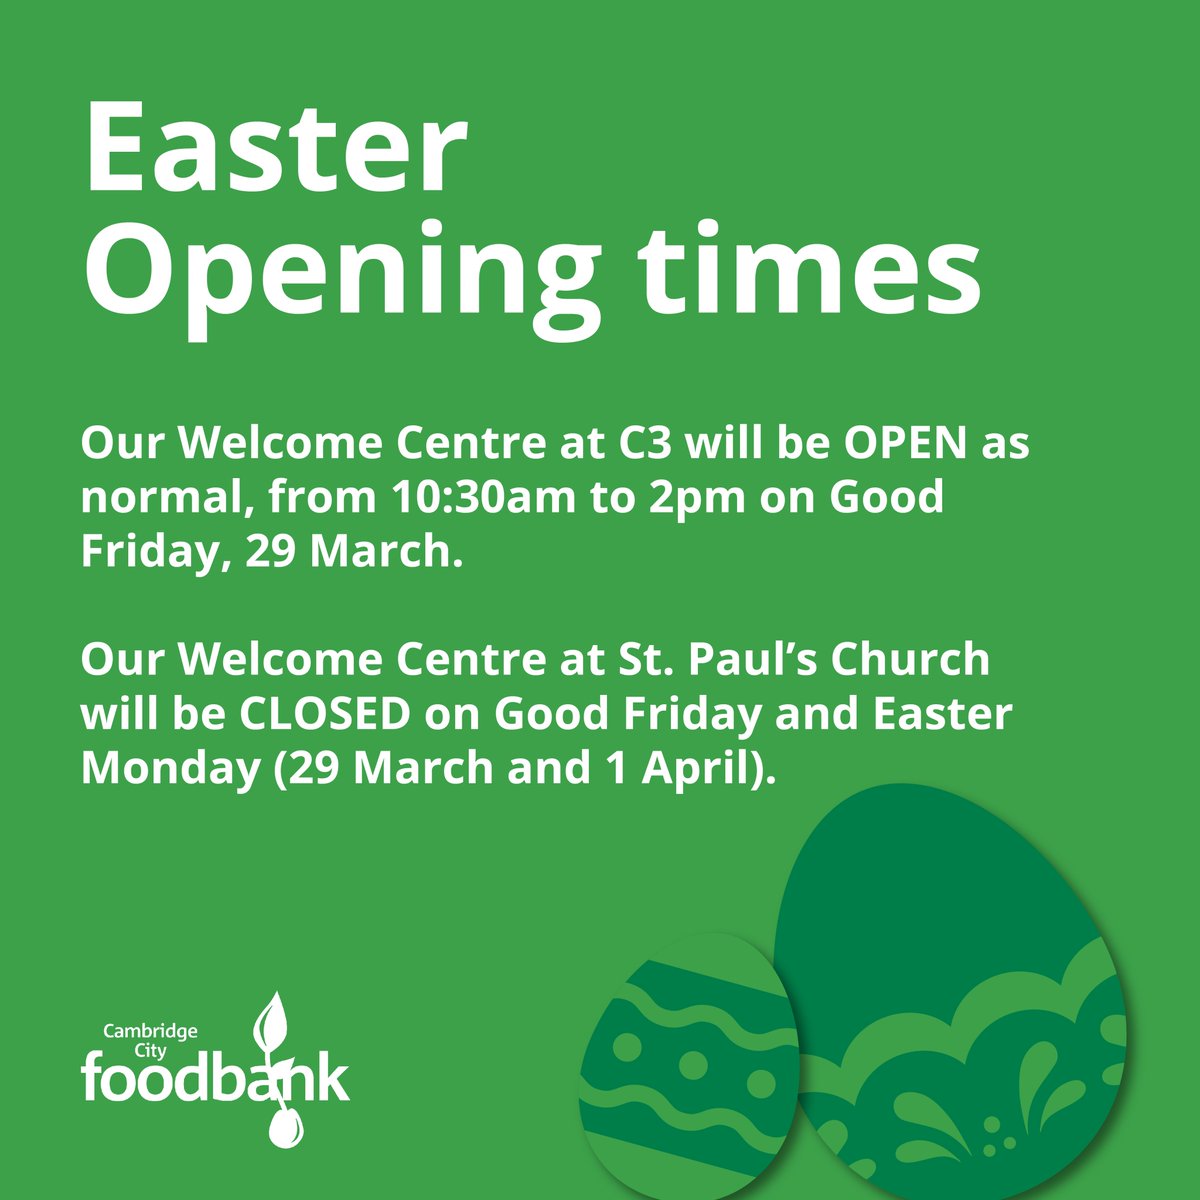 Some of the opening times at our Welcome Centres have changed because of the #Easter #BankHoliday. More details: cambridgecity.foodbank.org.uk/2024/03/22/eas…